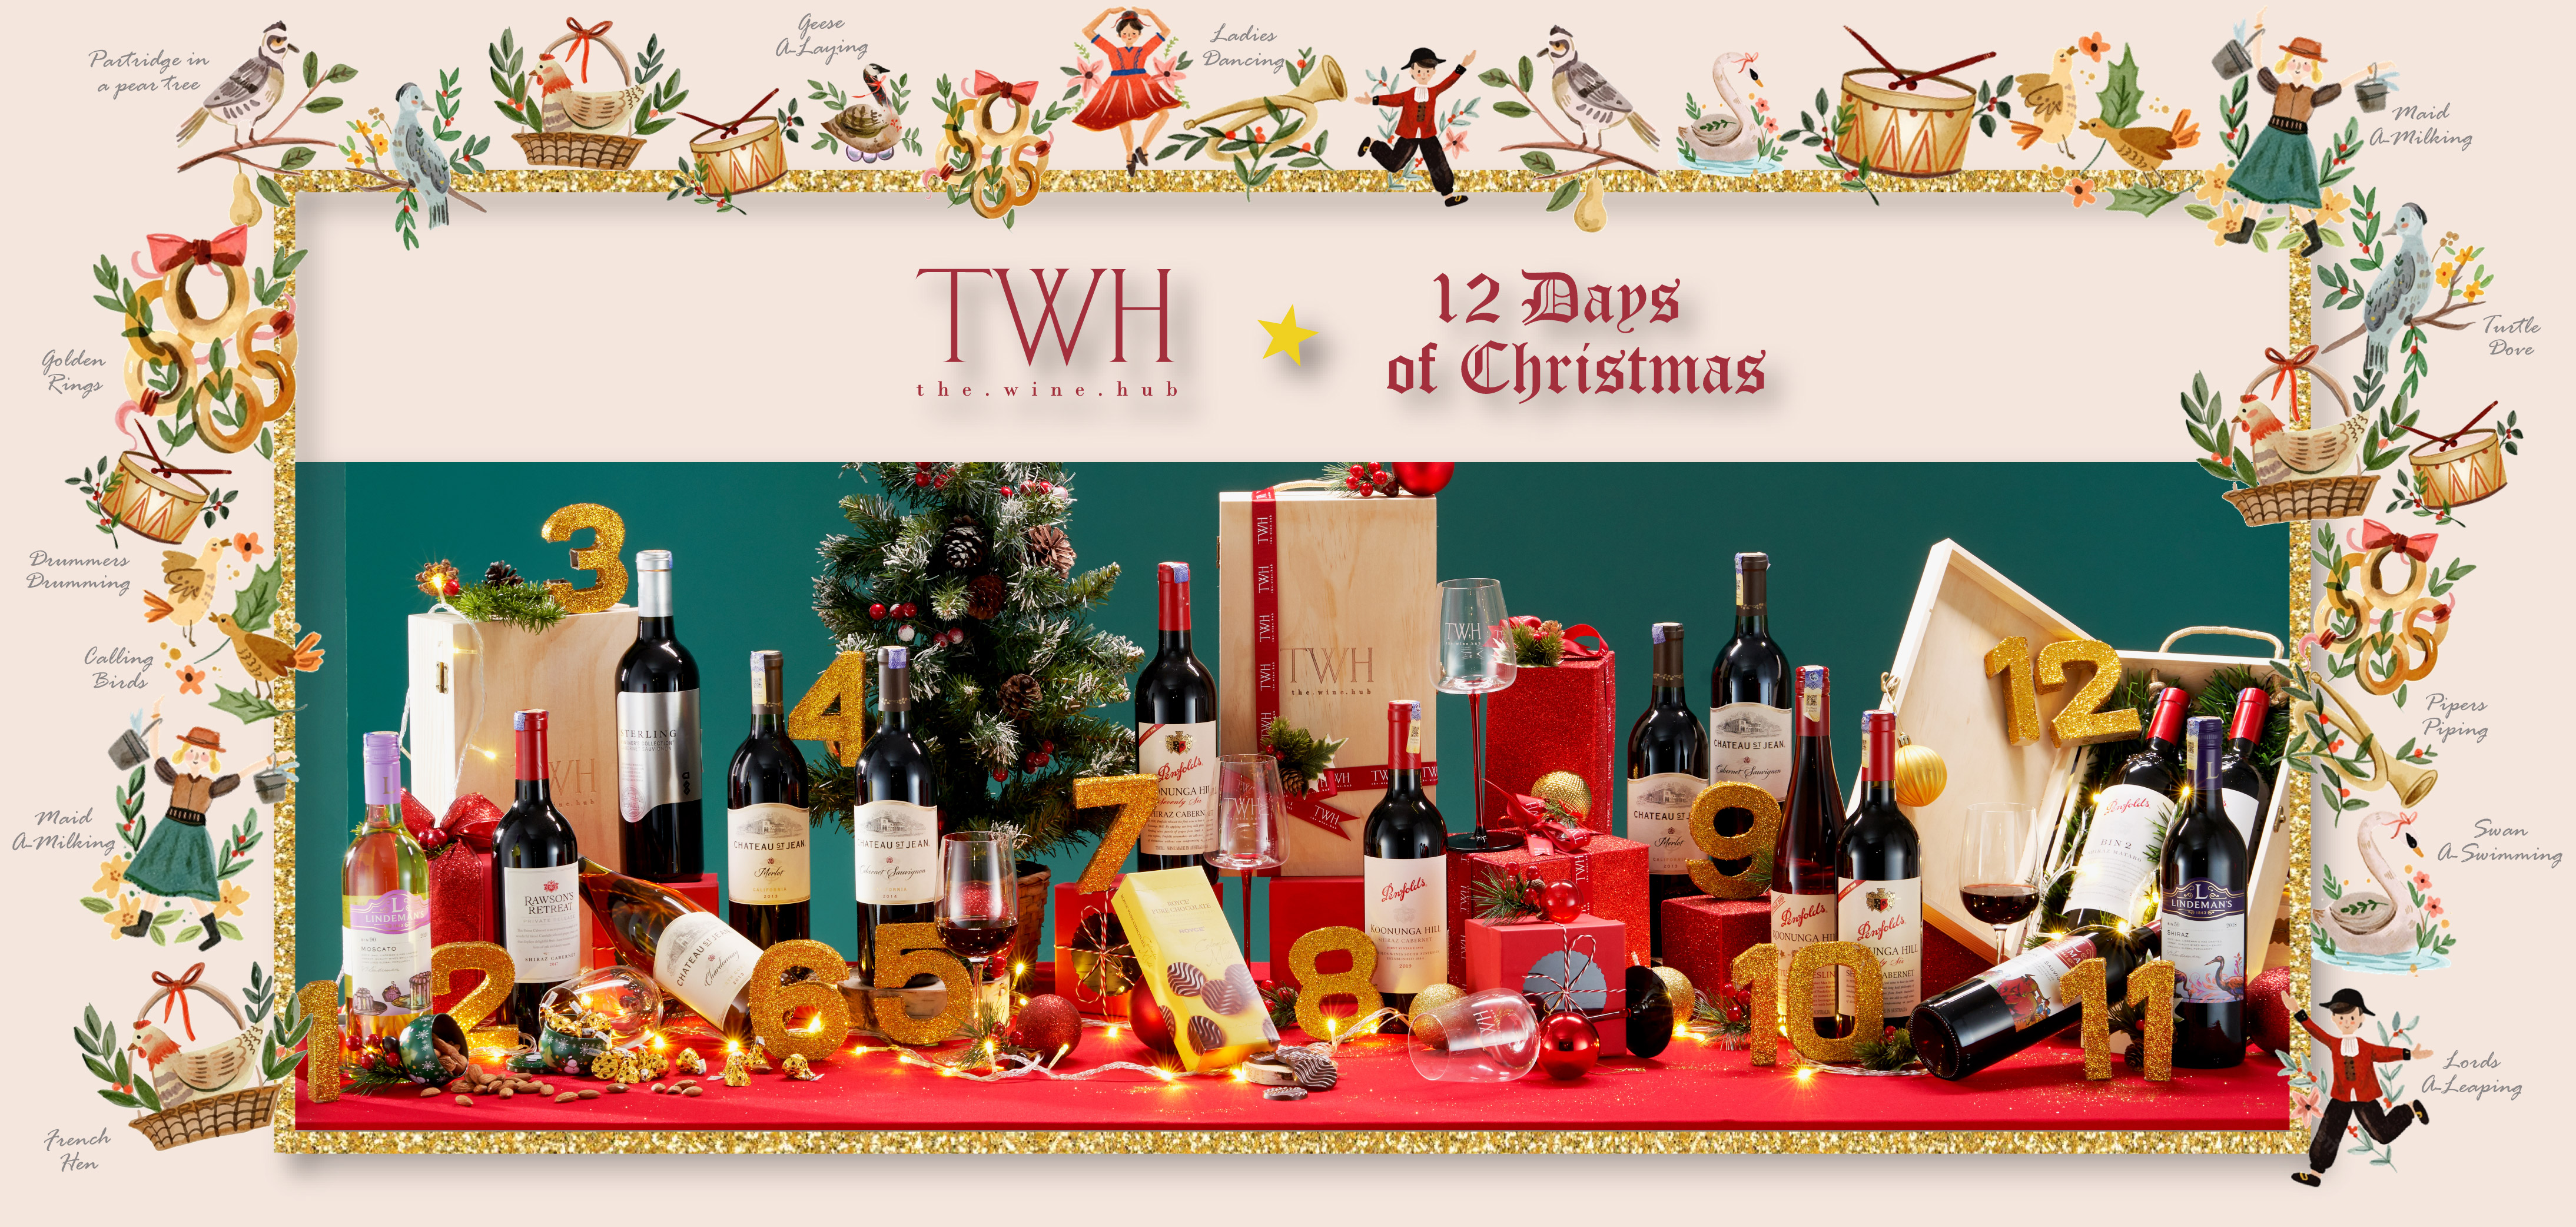 OUR 12 DAYS OF CHRISTMAS | TWH